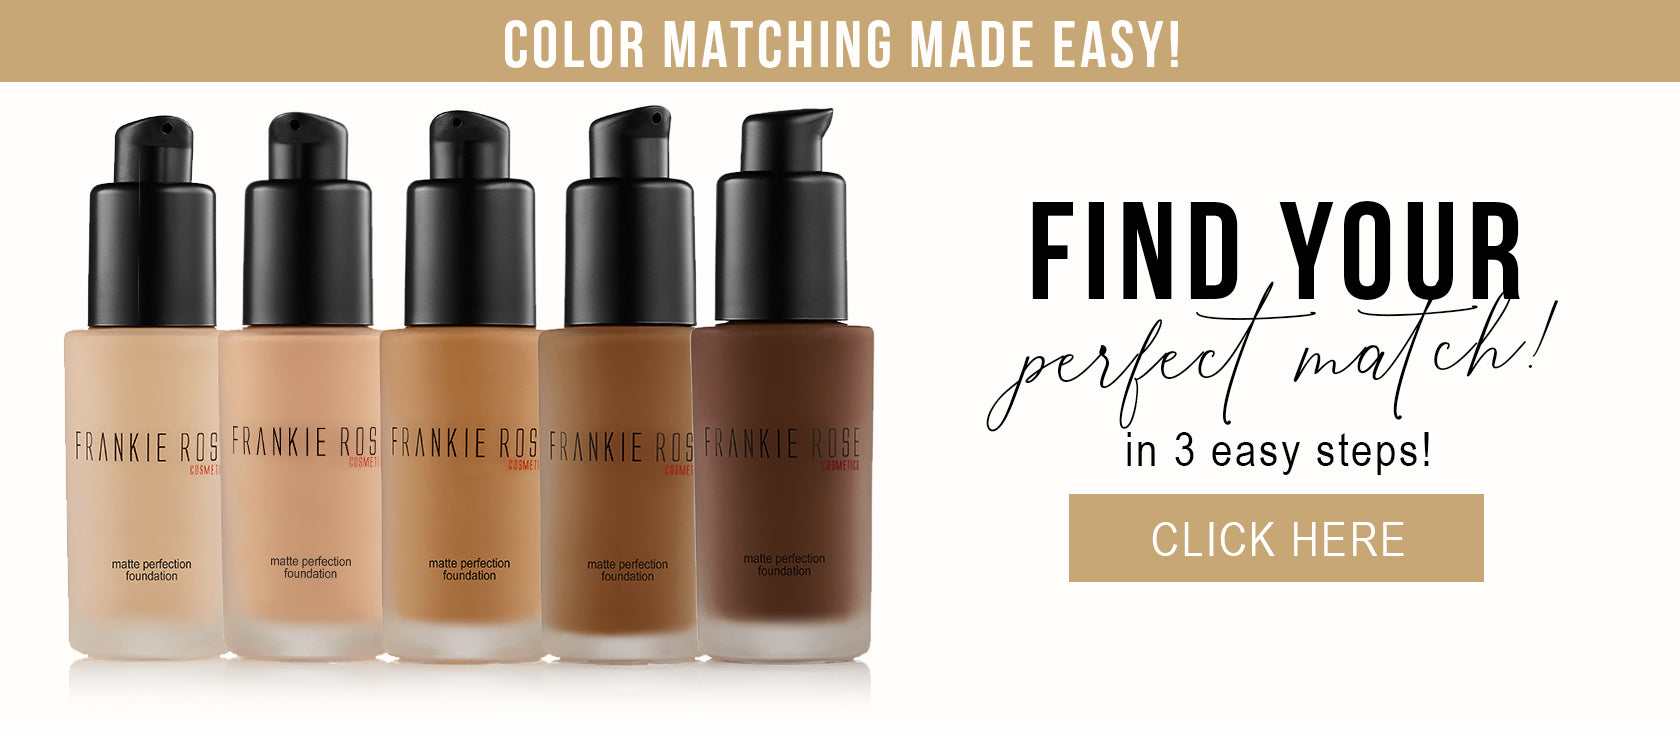 color matching made easy